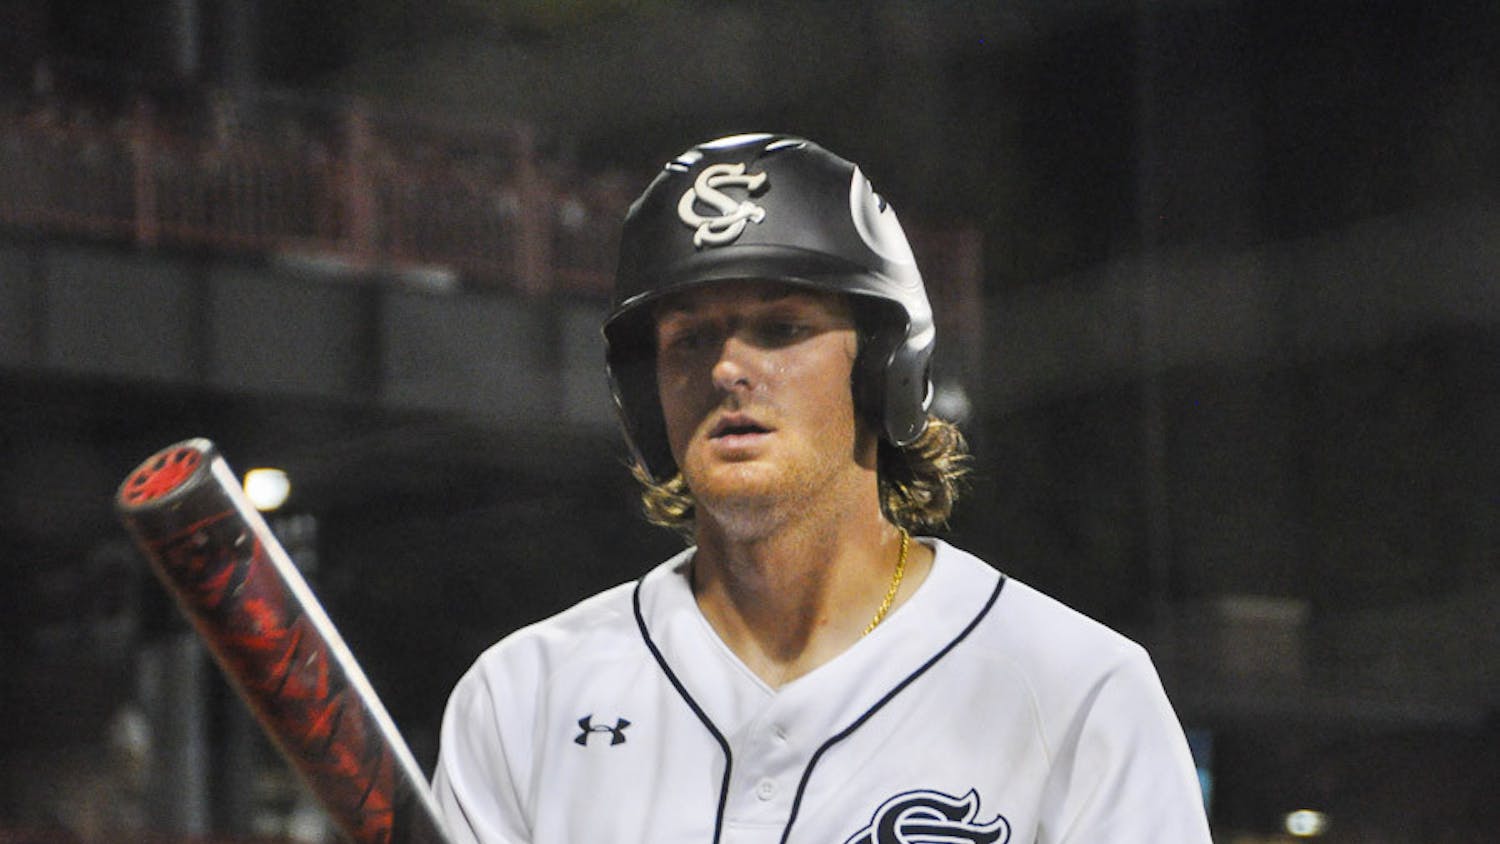 Senior infielder Braylen Wimmer gets ready to step up to the plate during the home game against the University of Georgia on April 8, 2022. Wimmer decided to return to South Carolina after making the 18th-round pick by the Philadelphia Phillies in July 2022.&nbsp;